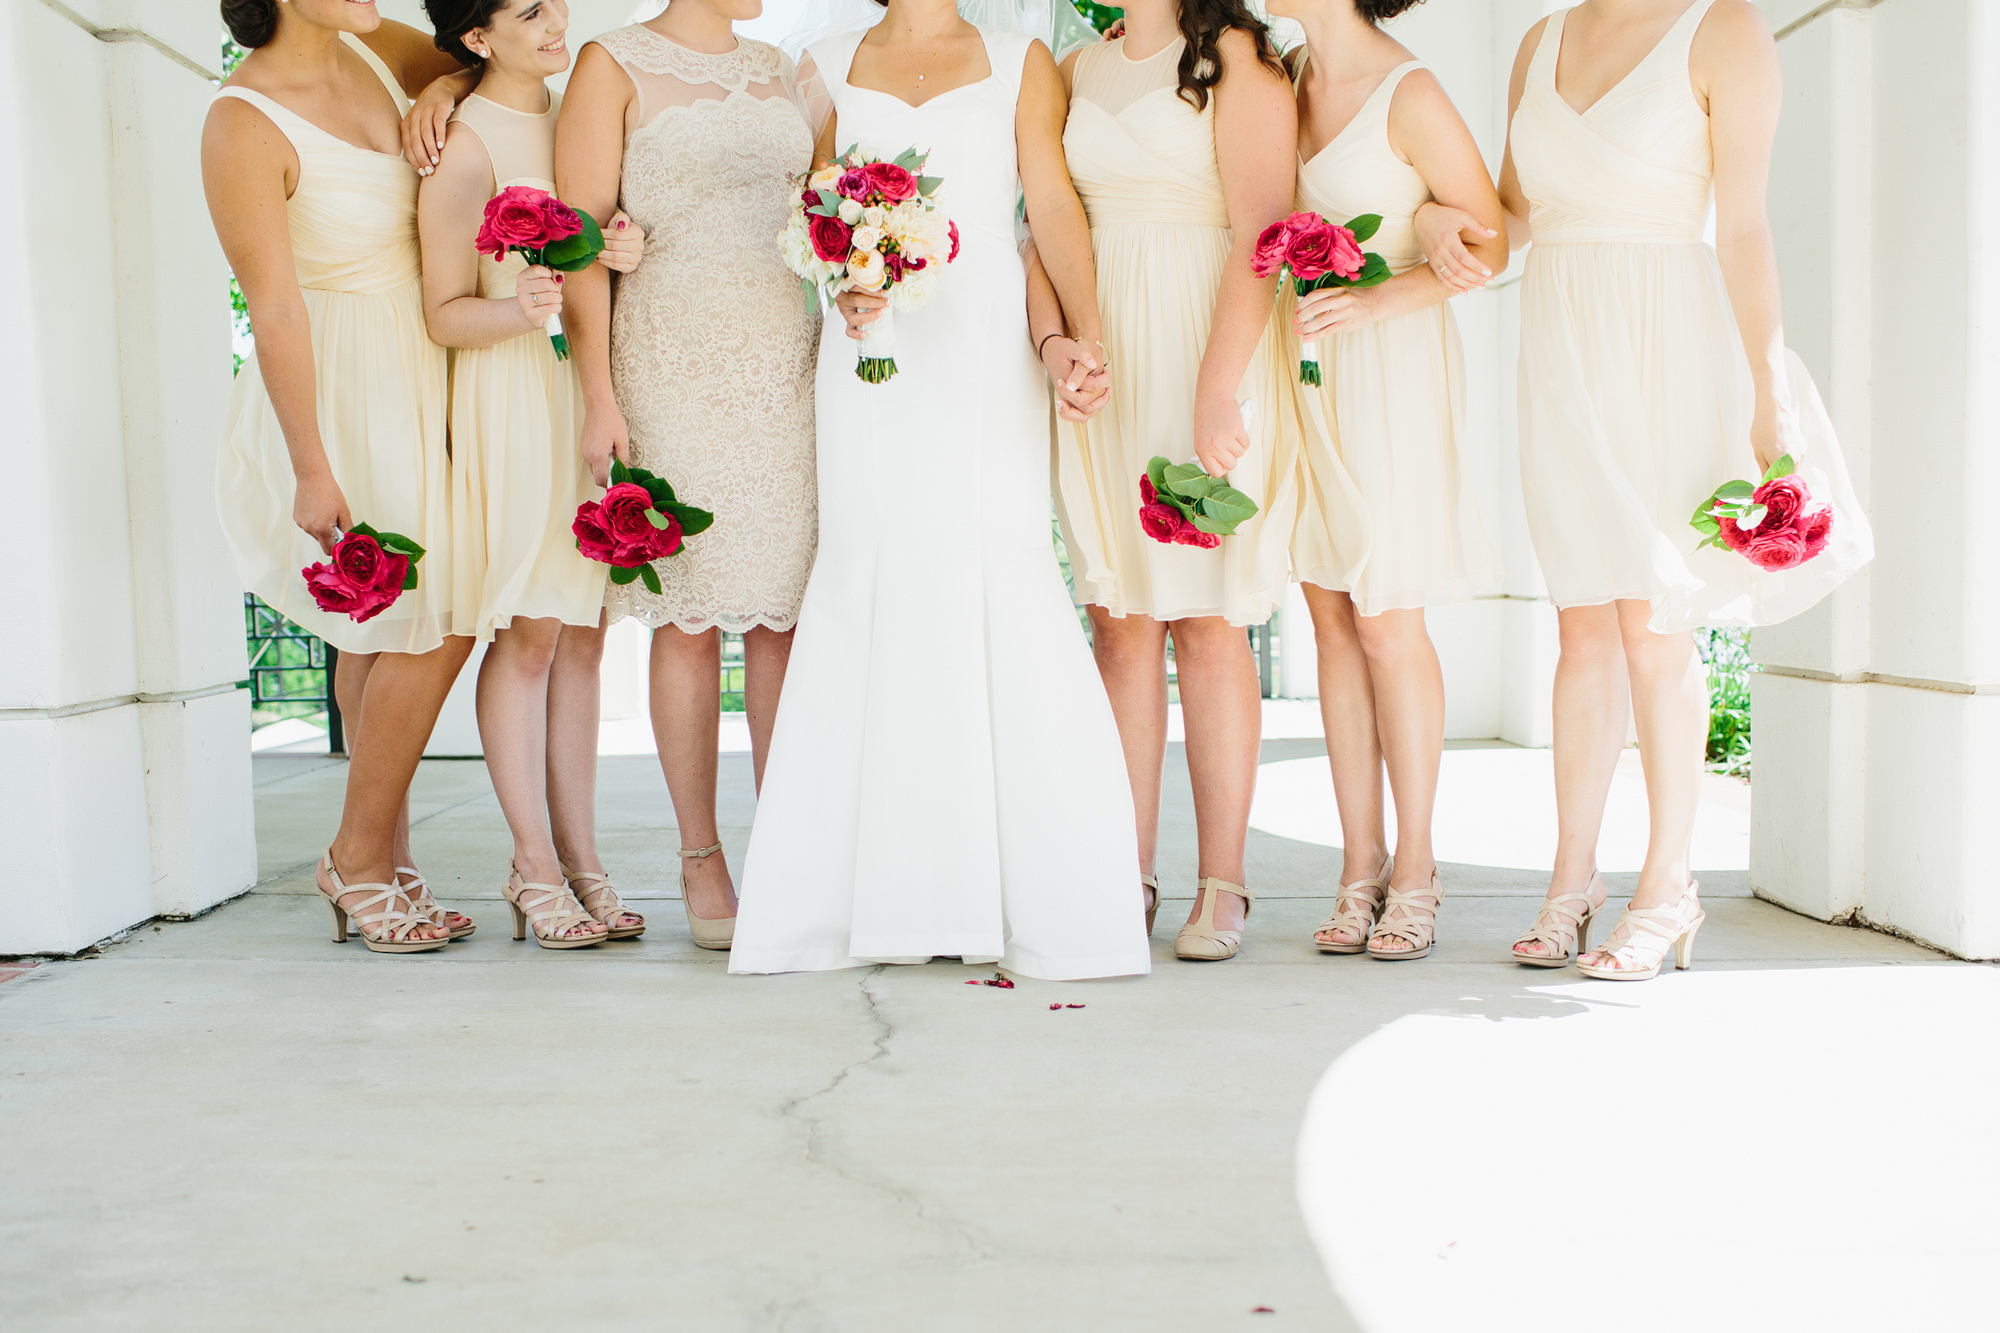 The bride and bridesmaids. 